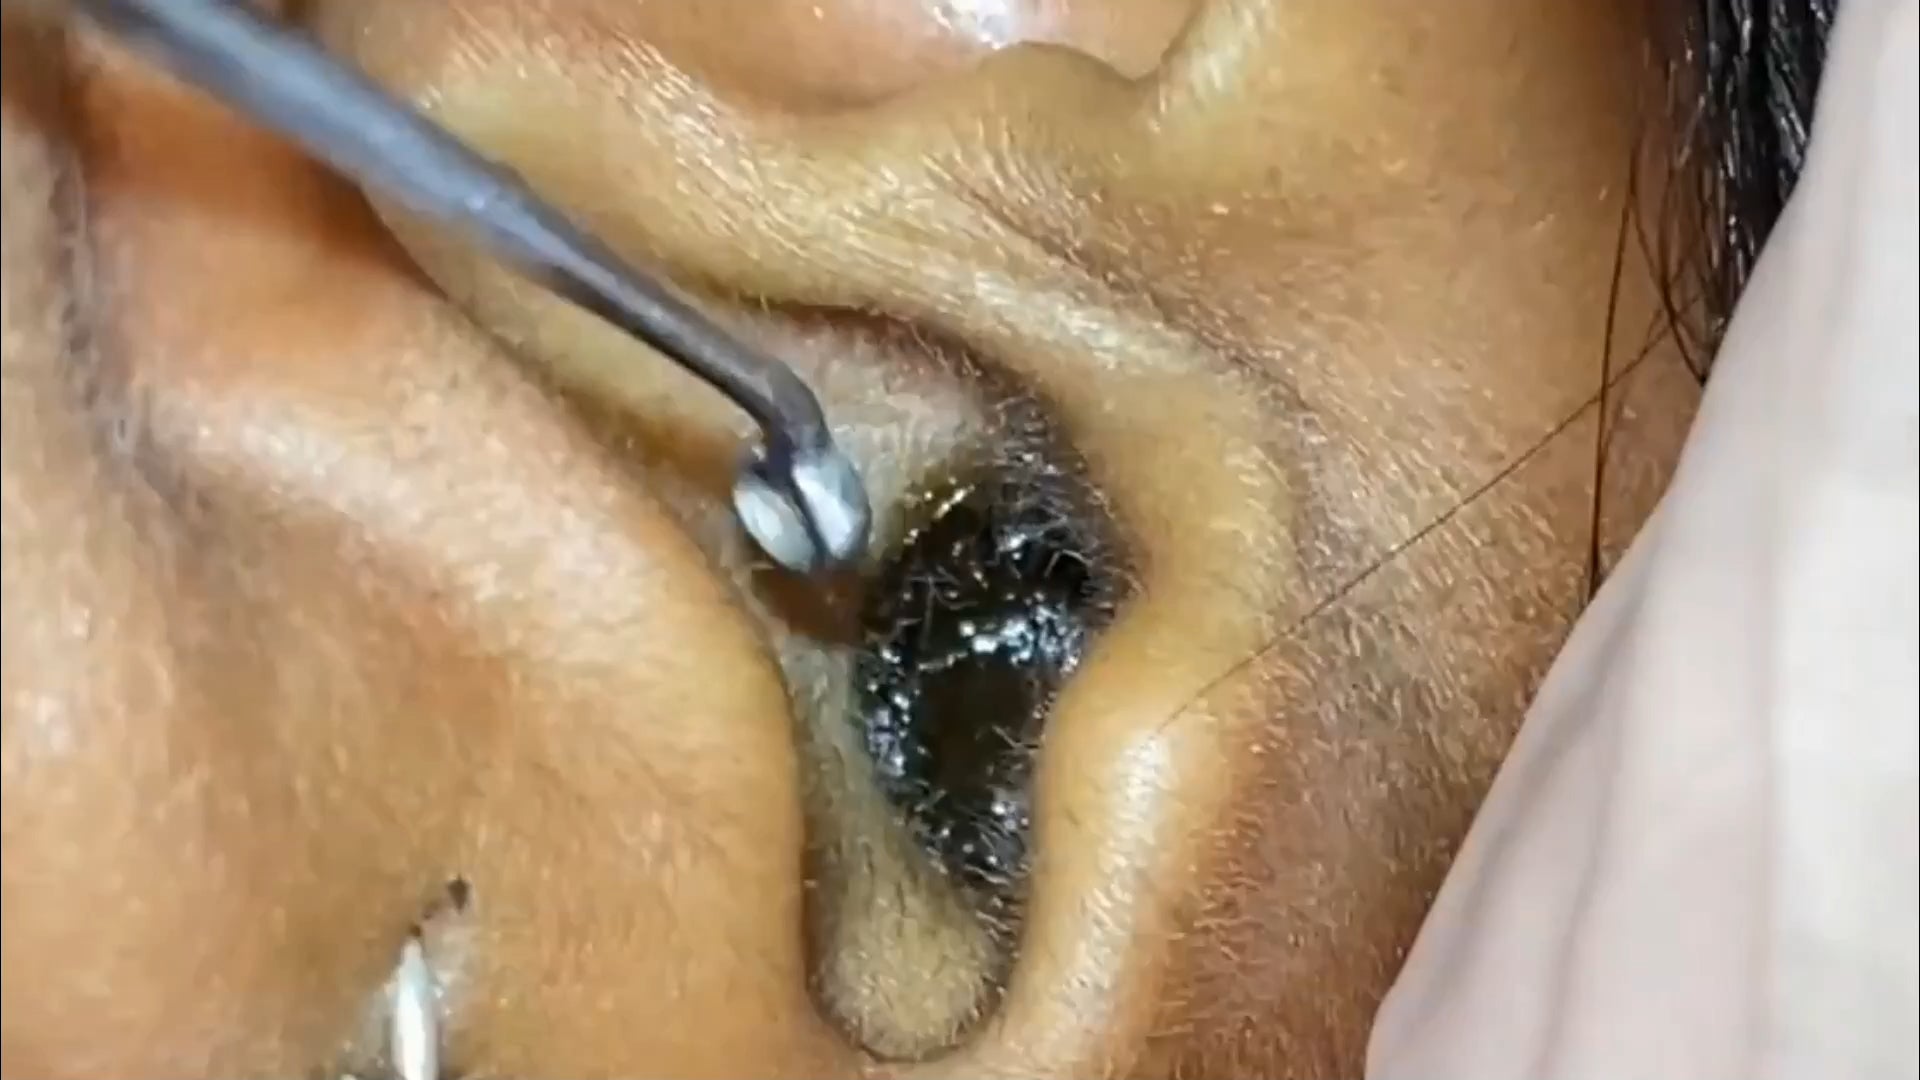 Removing ear wax from both ears : PoppingPimple